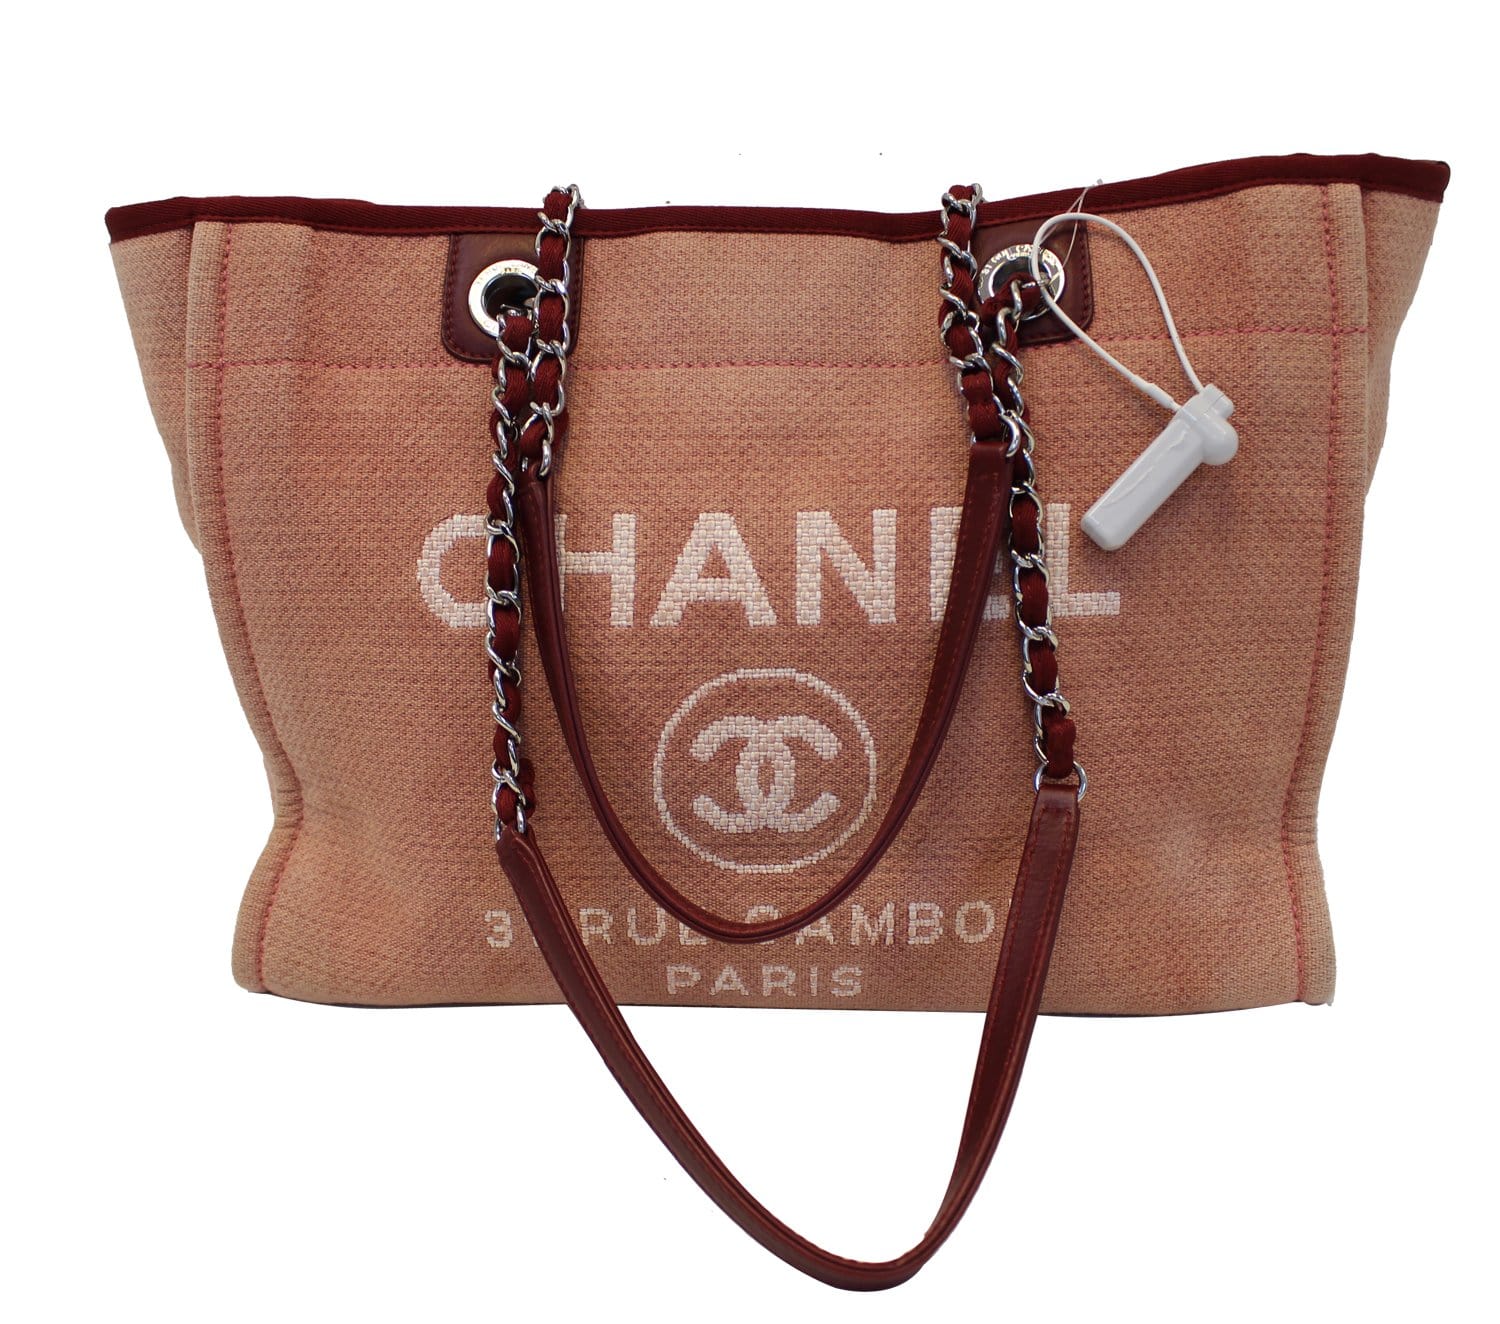 Chanel Canvas Medium Deauville Tote Red